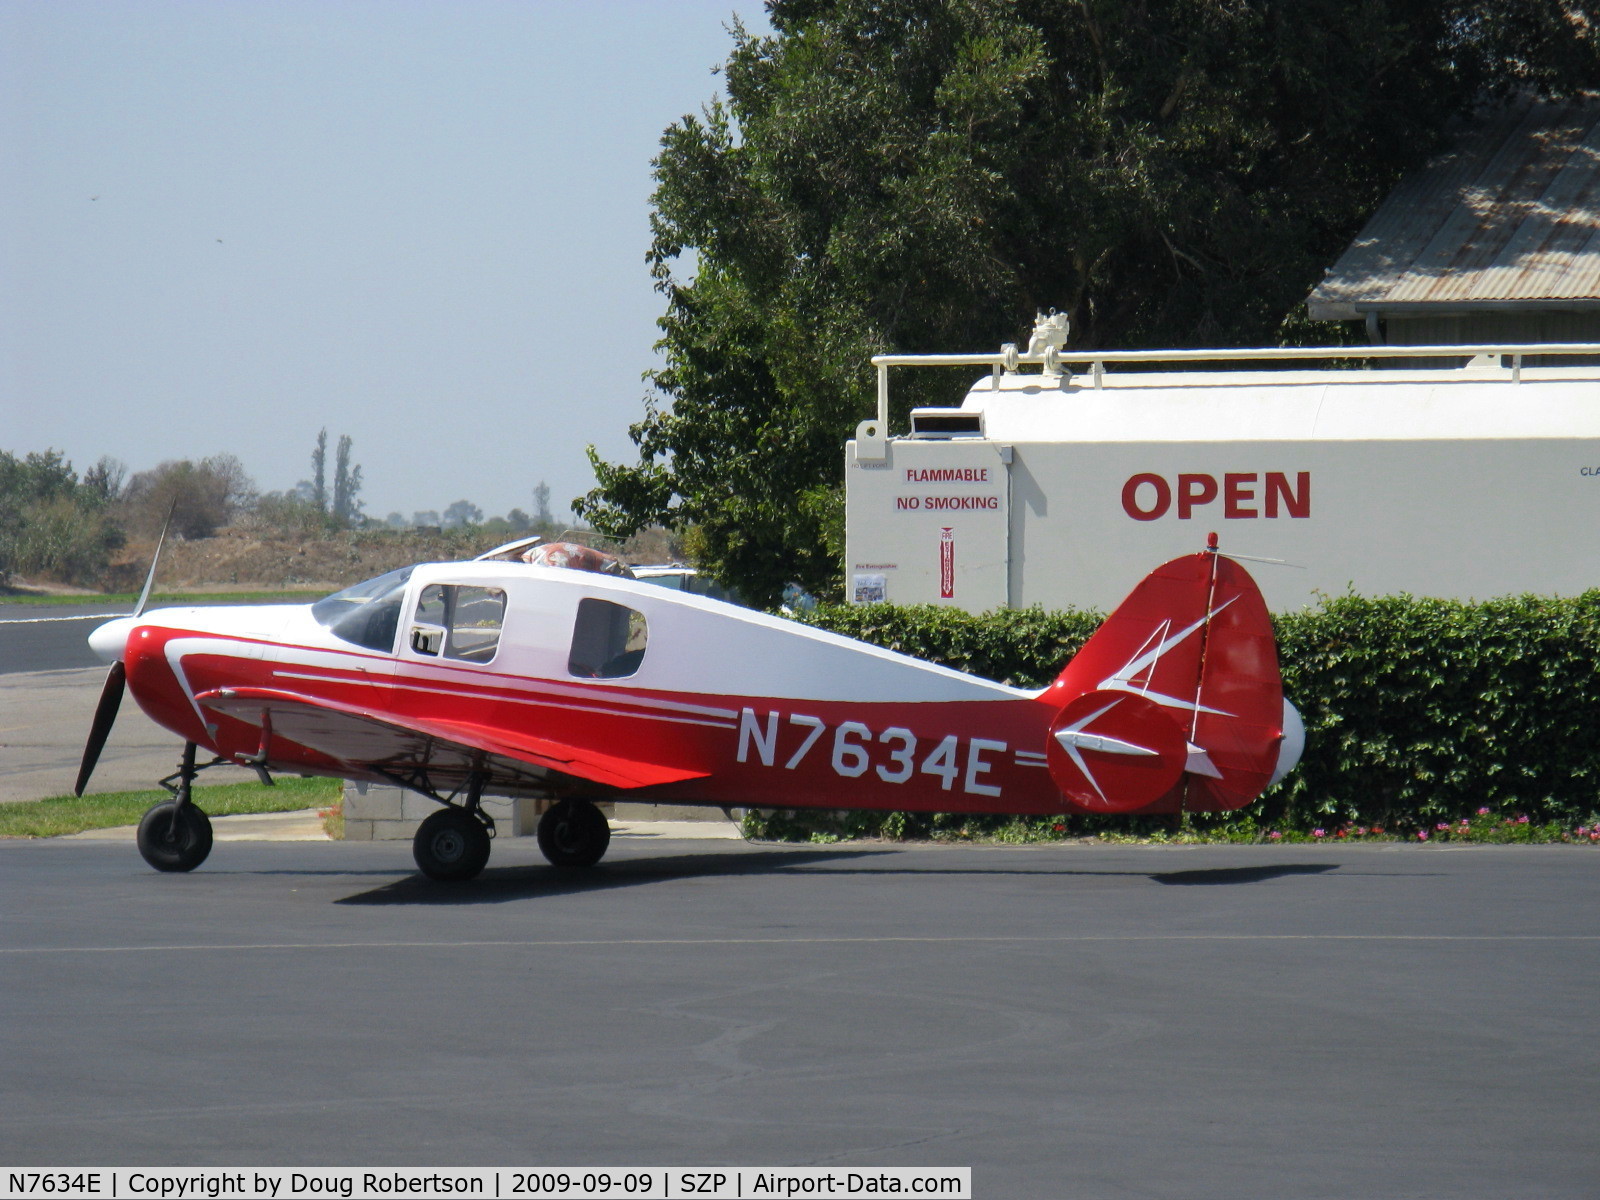 N7634E, 1959 Downer Bellanca 14-19-3 C/N 4136, 1959 Downer Bellanca 260 14-19-3 Cruisemaster, Continental O-470-F 260 Hp, refueling, last of the triple-tail Bellancas model-the 260A went to single tail.